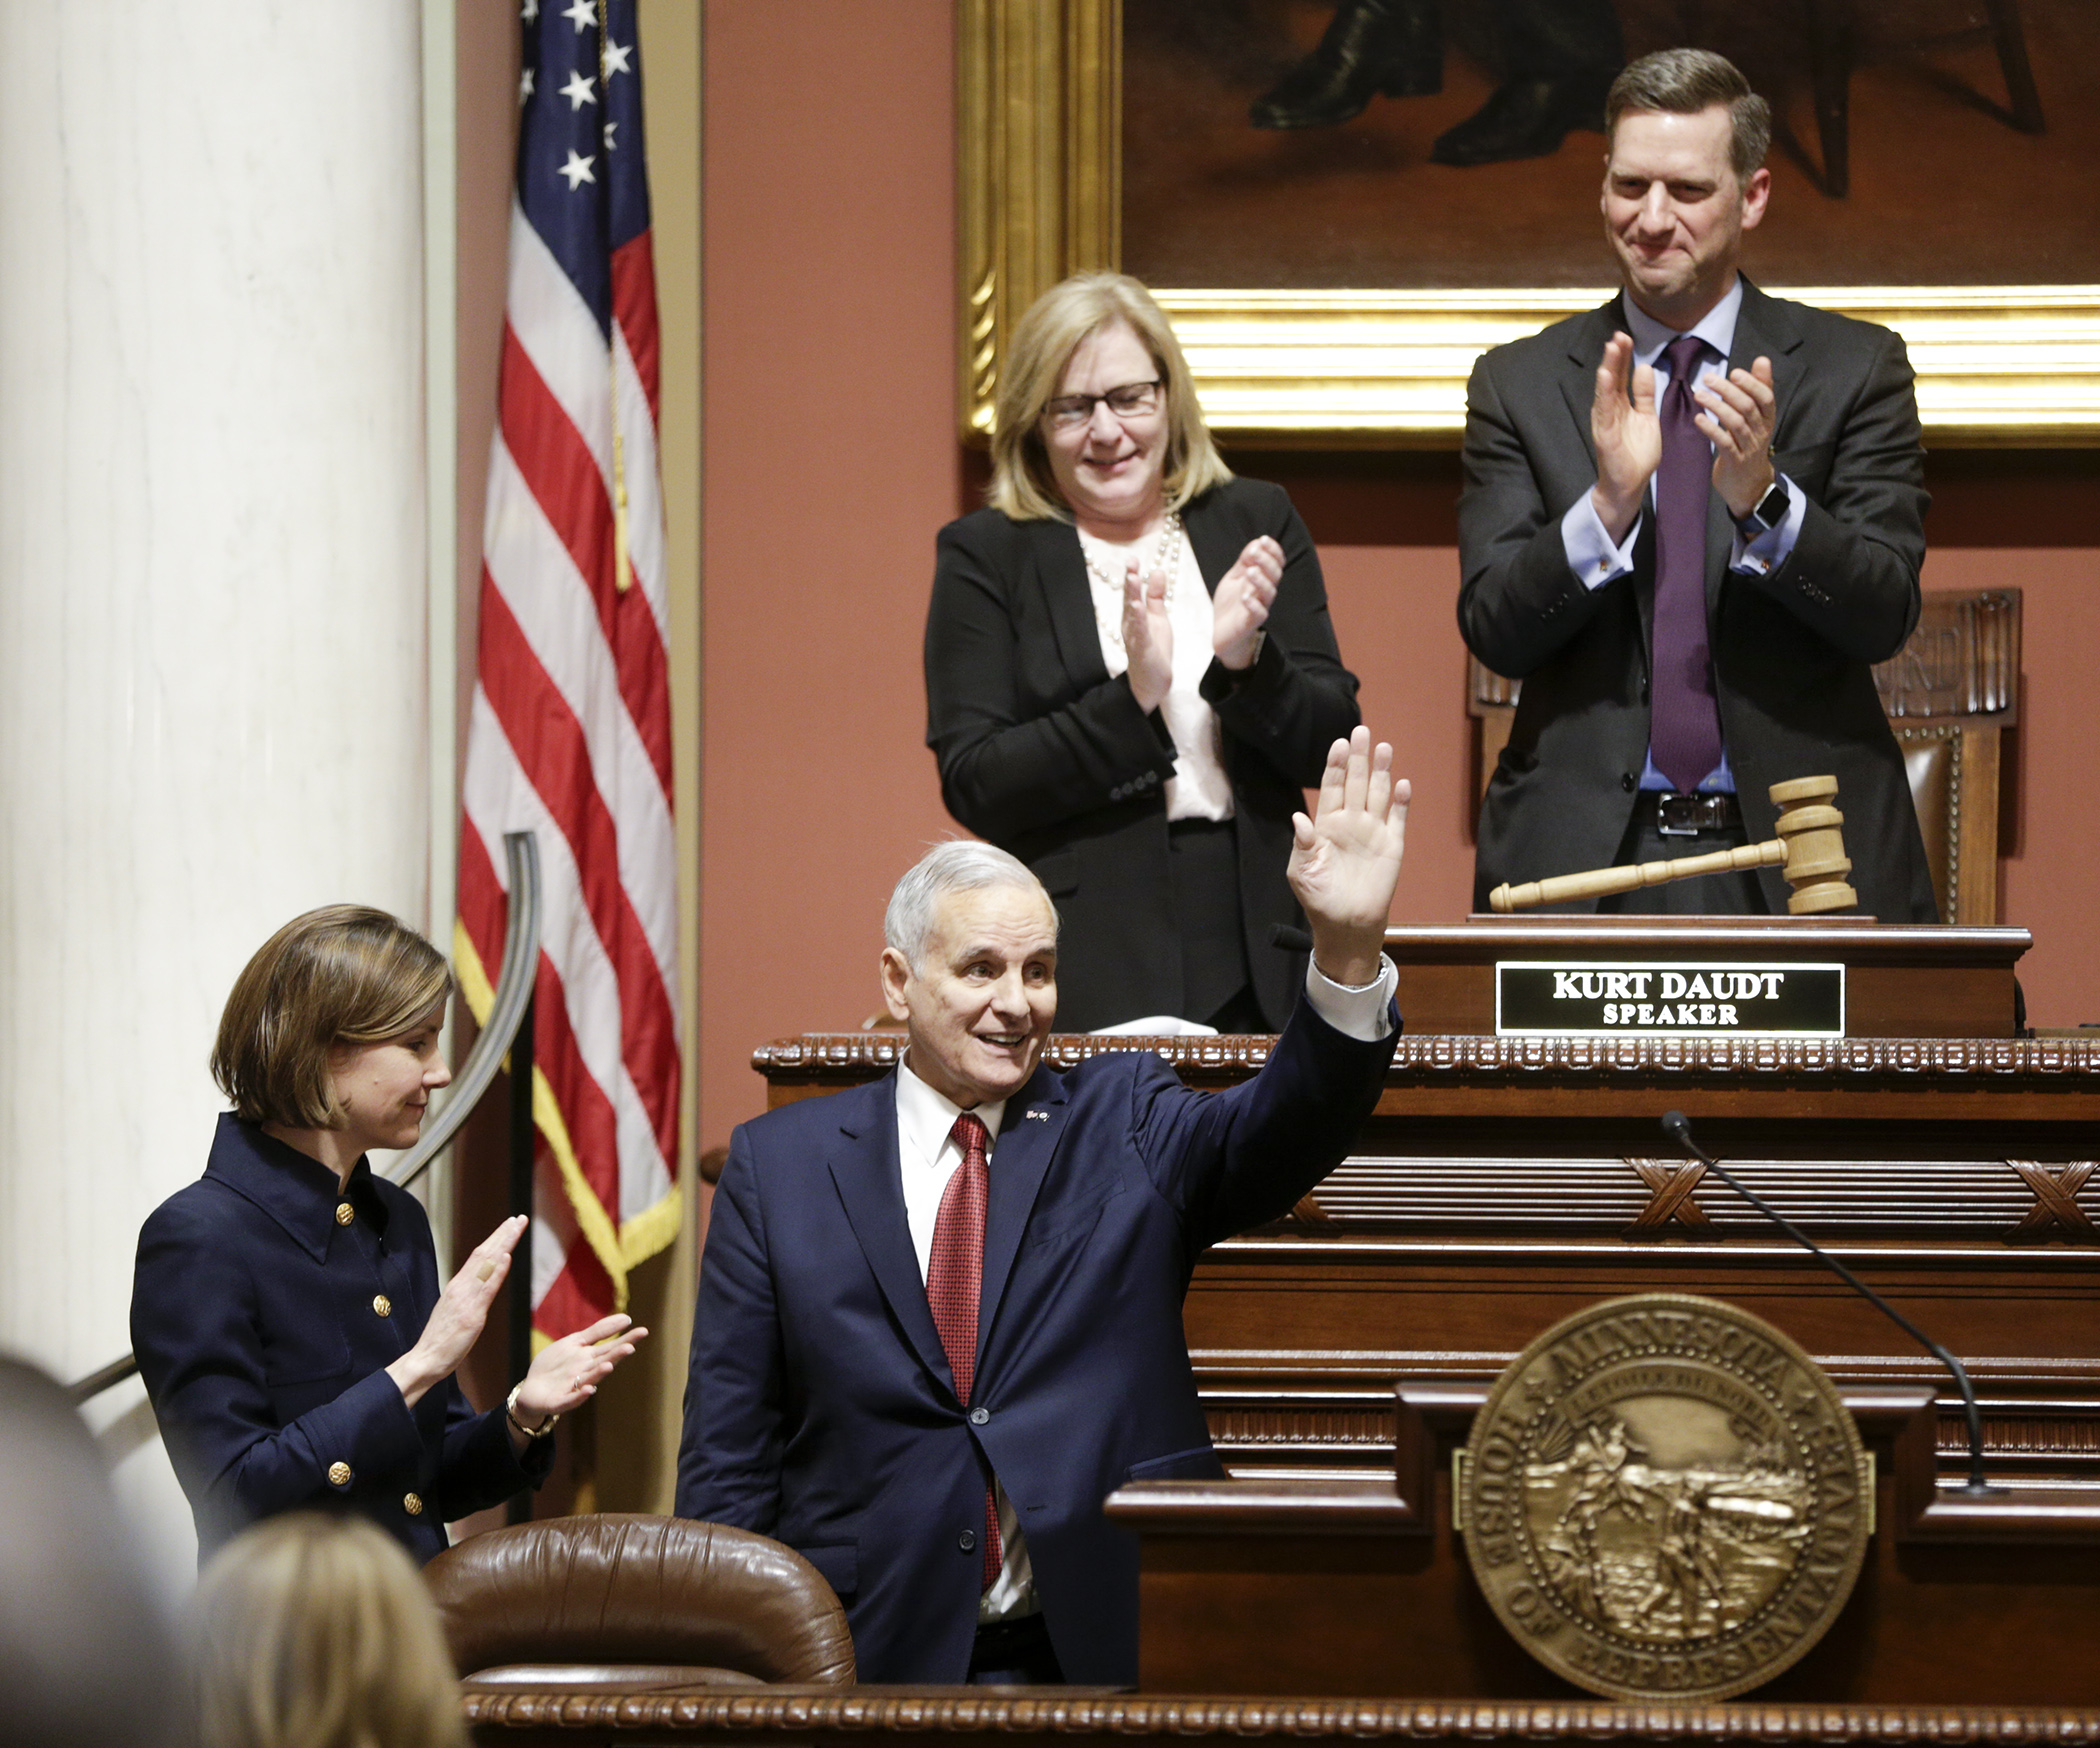 Gov. Mark Dayton waves Wednesday night after finishing his State of the State Address in the House Chamber. Photo by Paul Battaglia